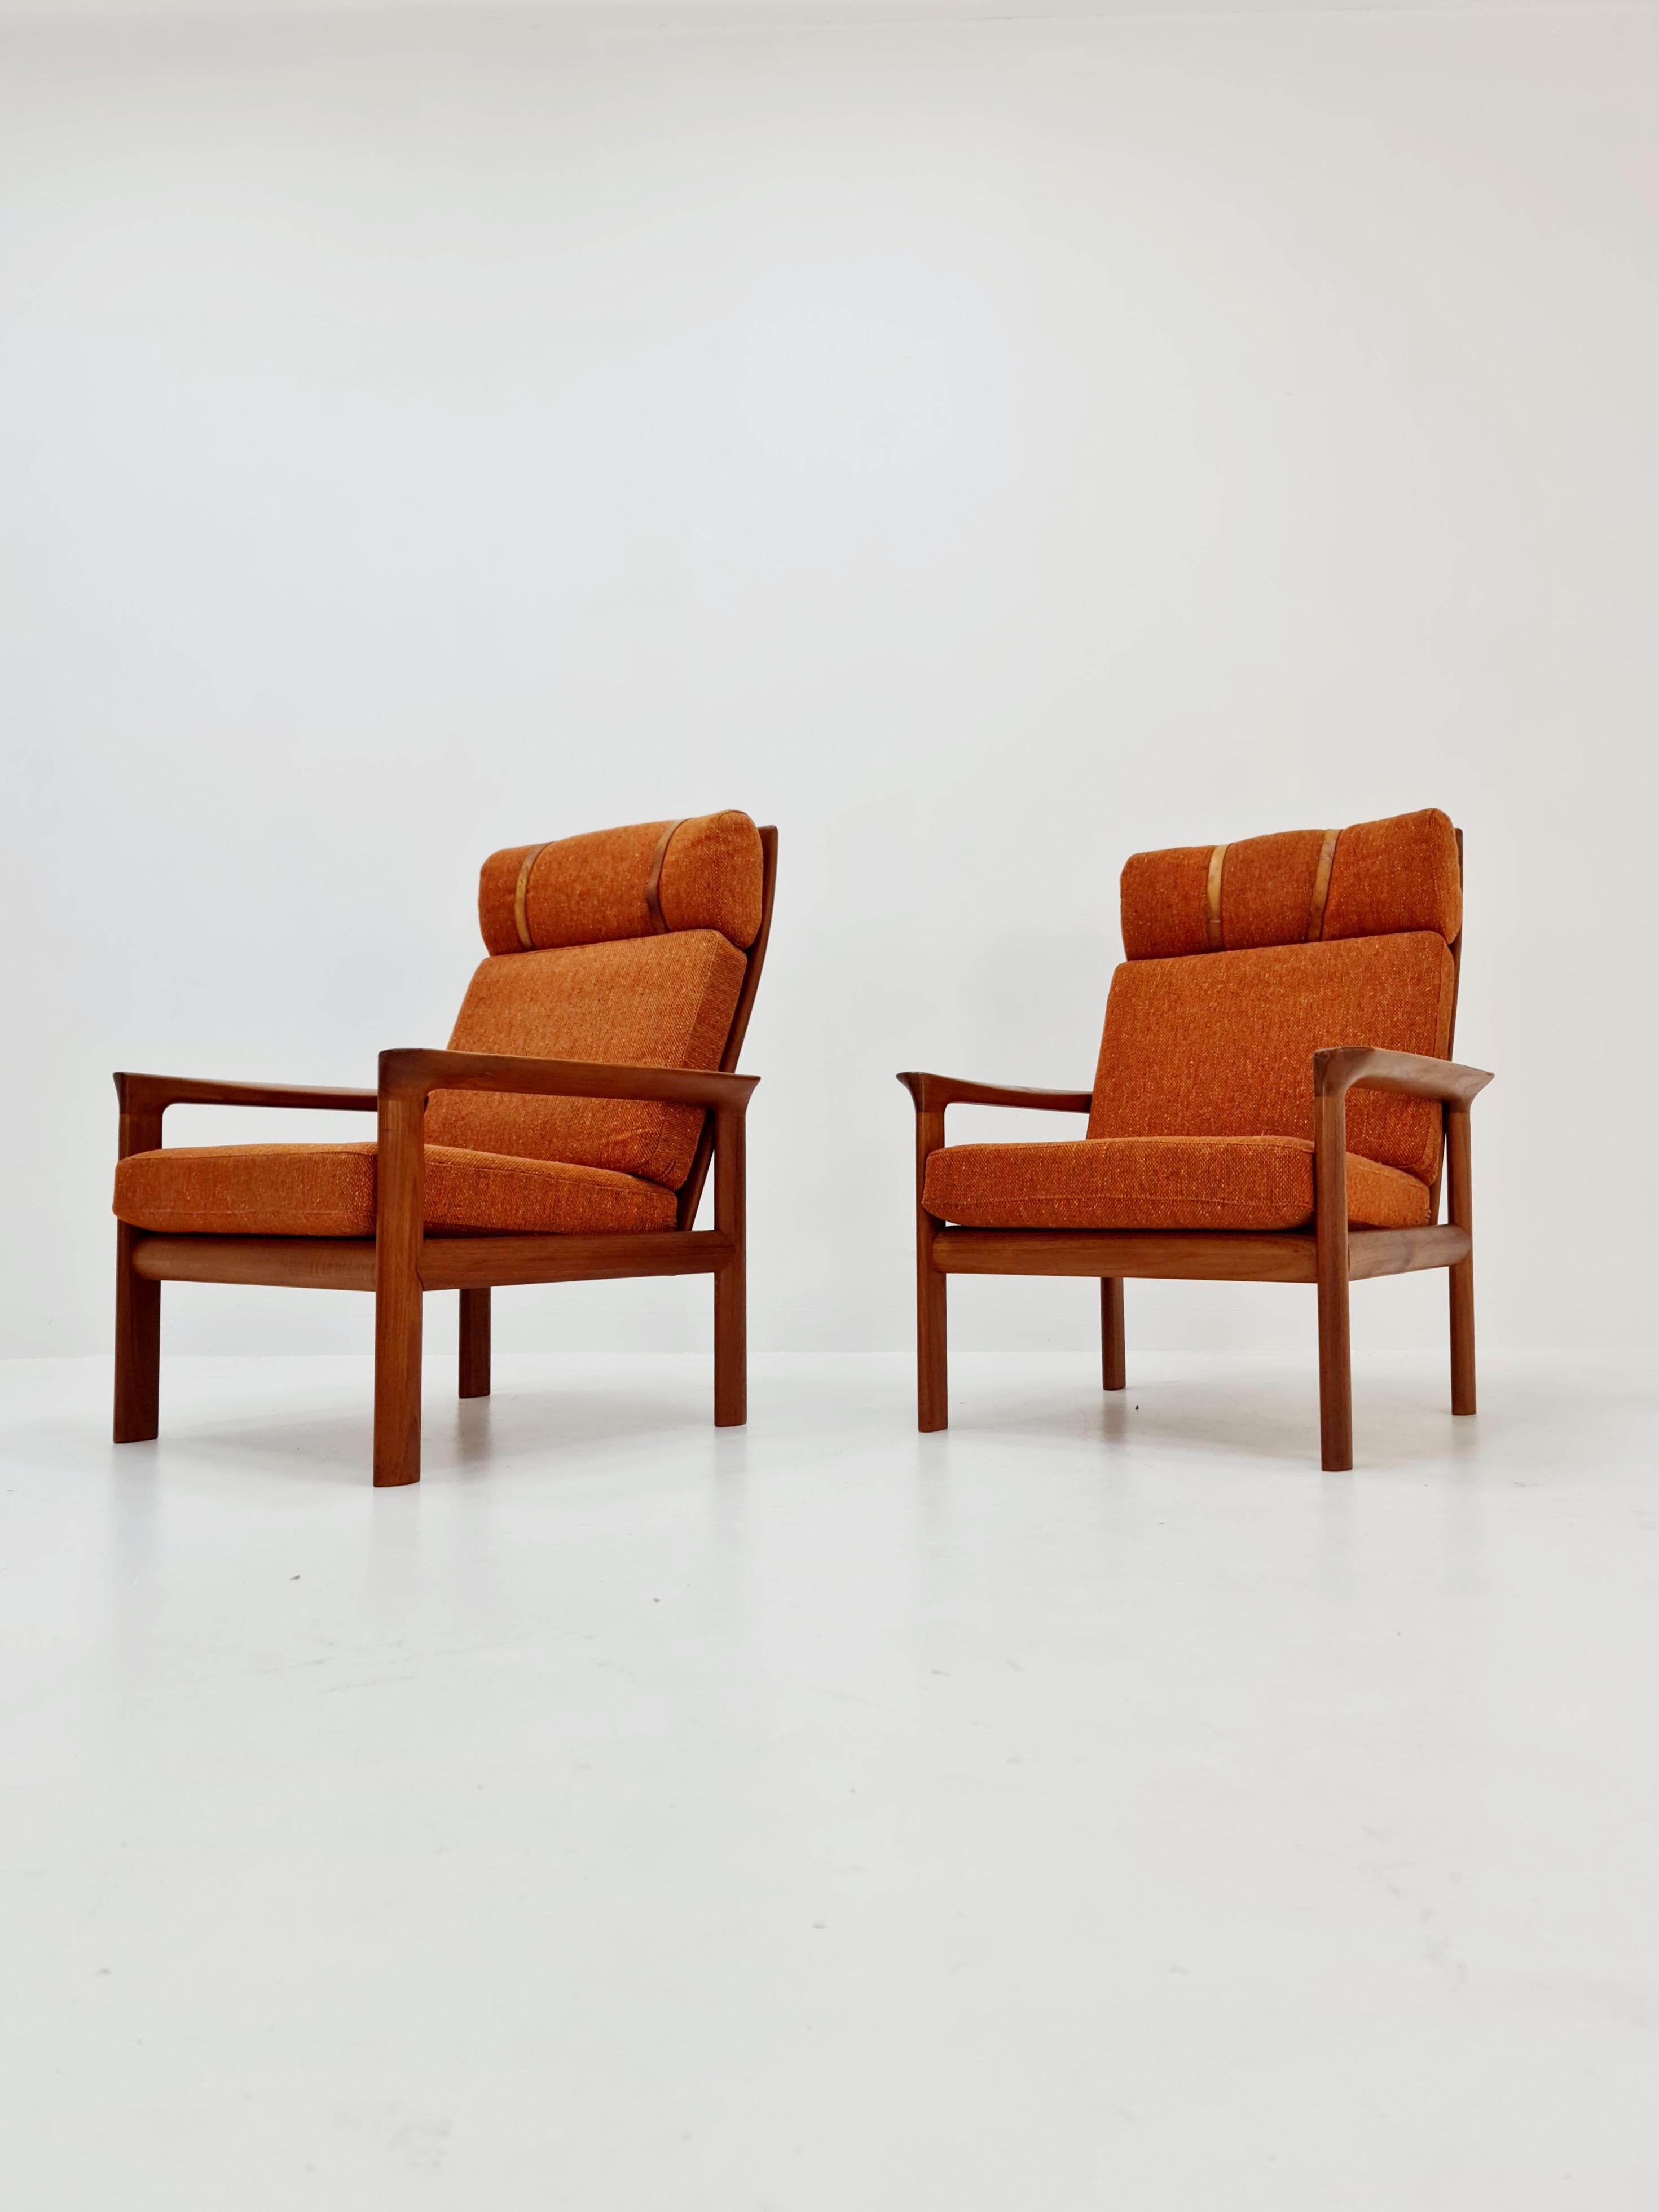 Mid century teak easy lounge high back chairs by Sven Ellekaer for Komfort  In Good Condition For Sale In Gaggenau, DE